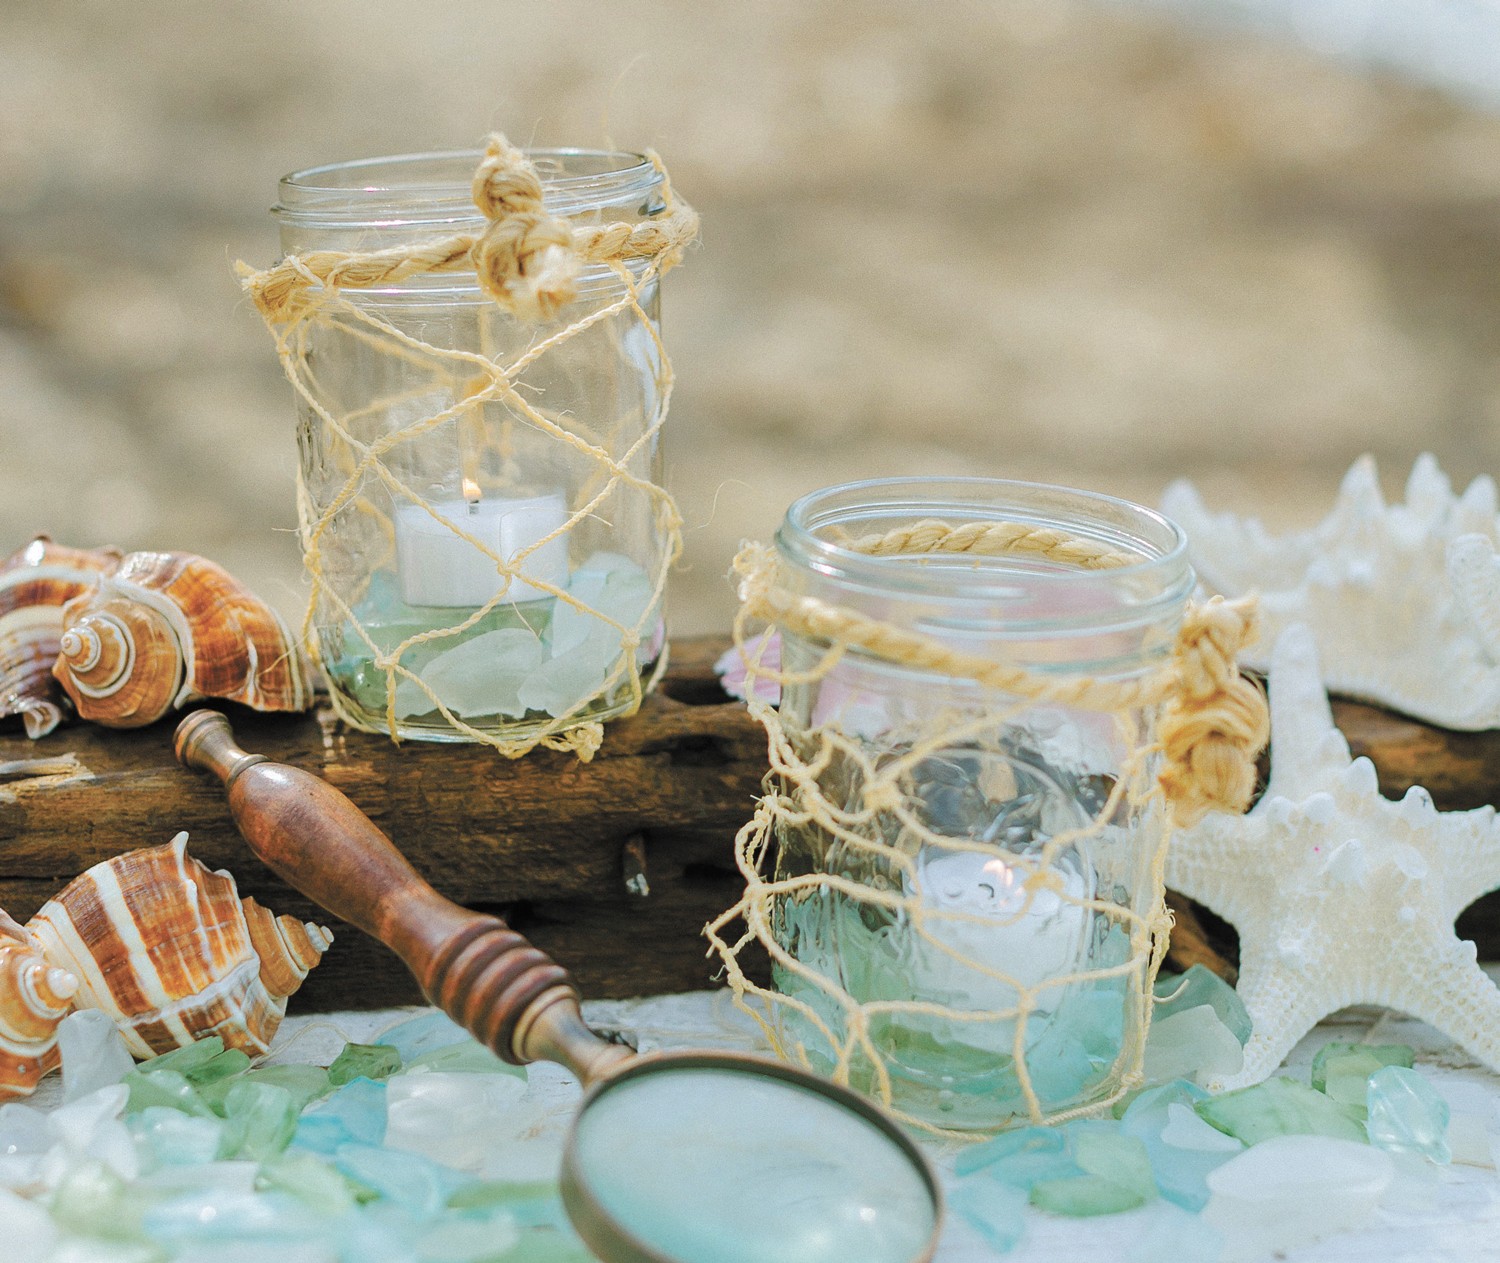 Create a memorable picnic with minimal effort and expense